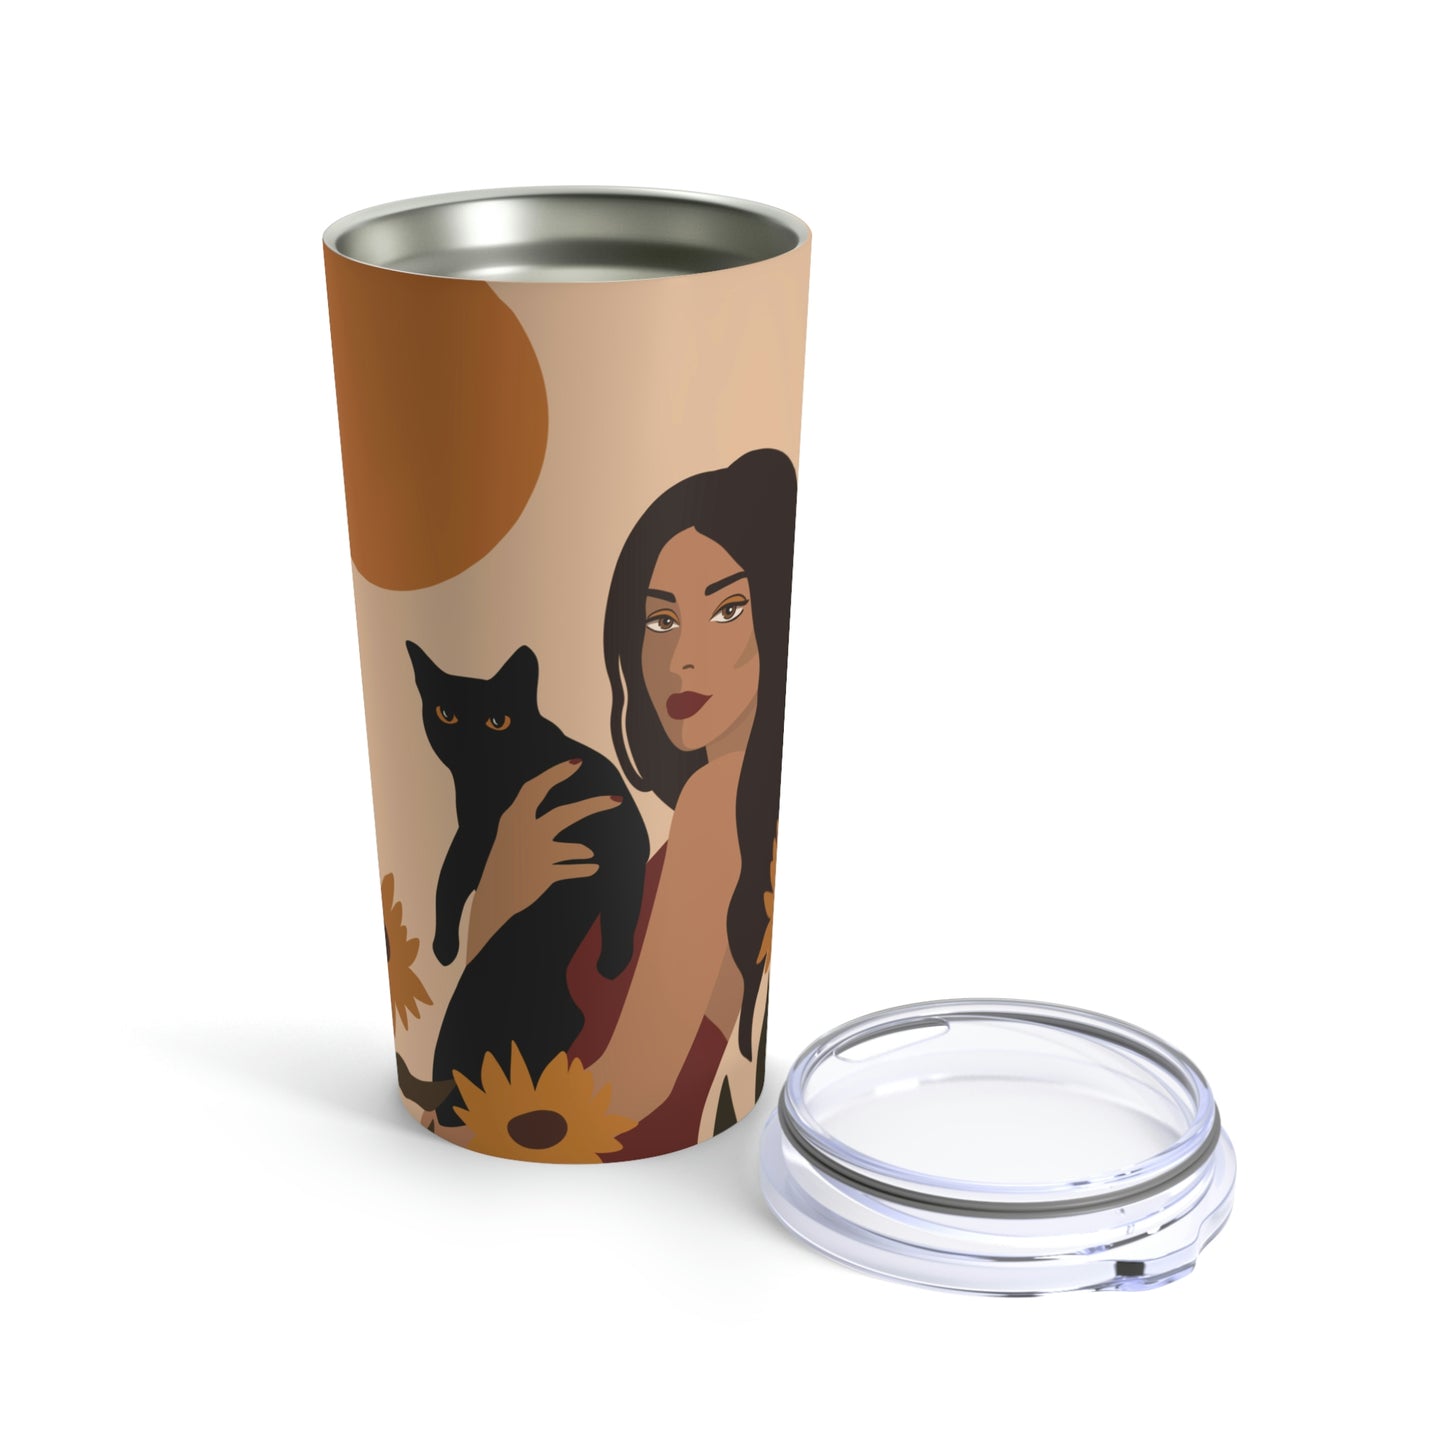 Woman with Black Cat Mininal Sunflowers Aesthetic Art Stainless Steel Hot or Cold Vacuum Tumbler 20oz